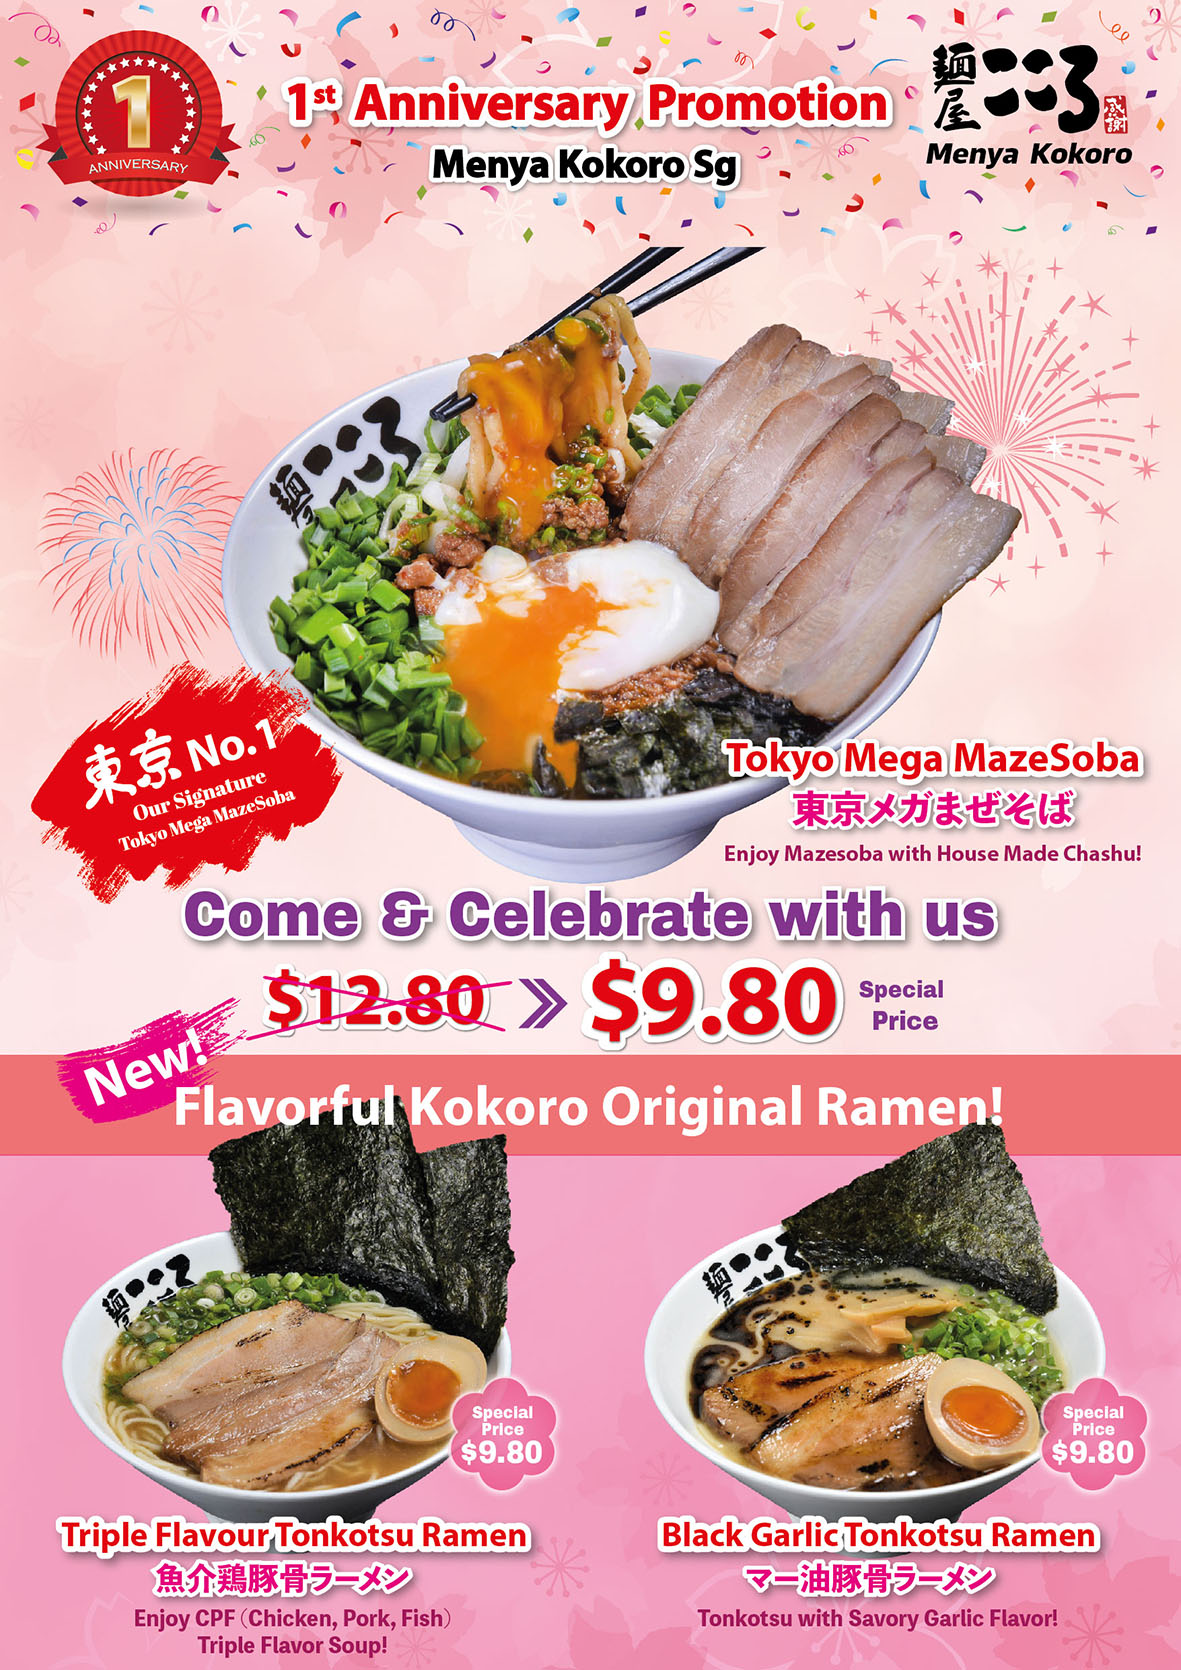 Menya Kokoro Singapore’s 1st Anniversary Promotion – selected items at $9.80++ only! - 1